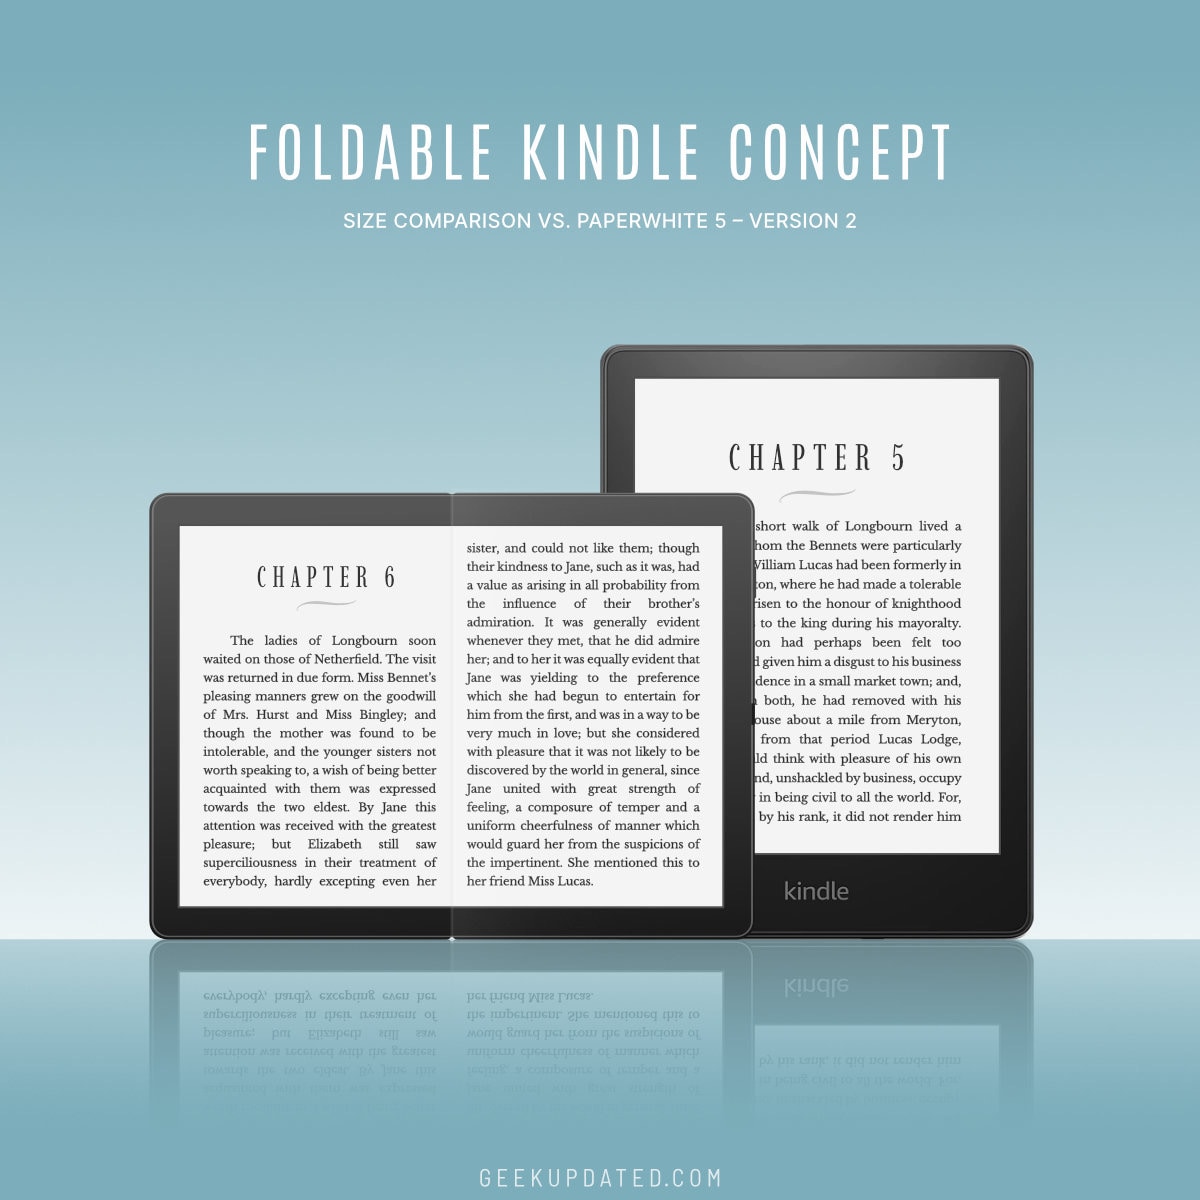 Would you buy a foldable e-reader? (visualizations)